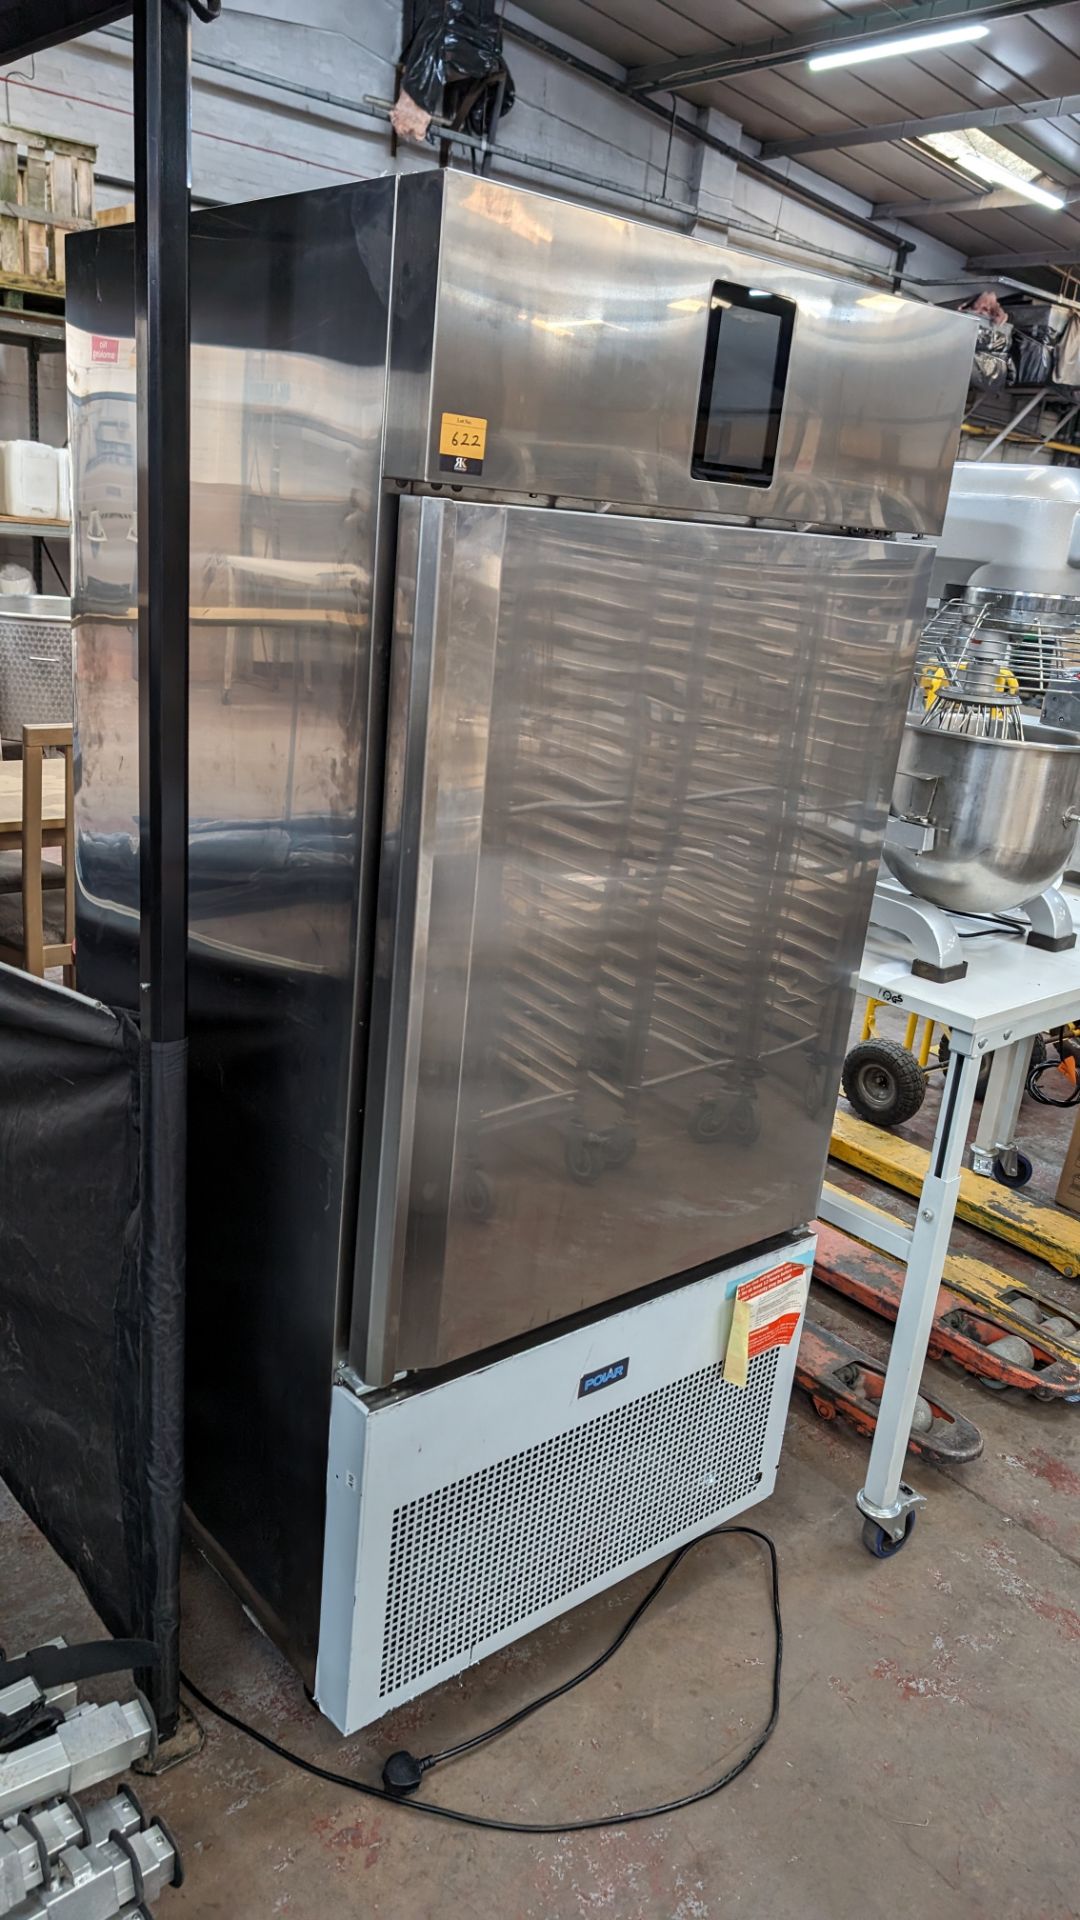 Polar Refrigeration mobile stainless steel commercial blast chiller with touchscreen controls